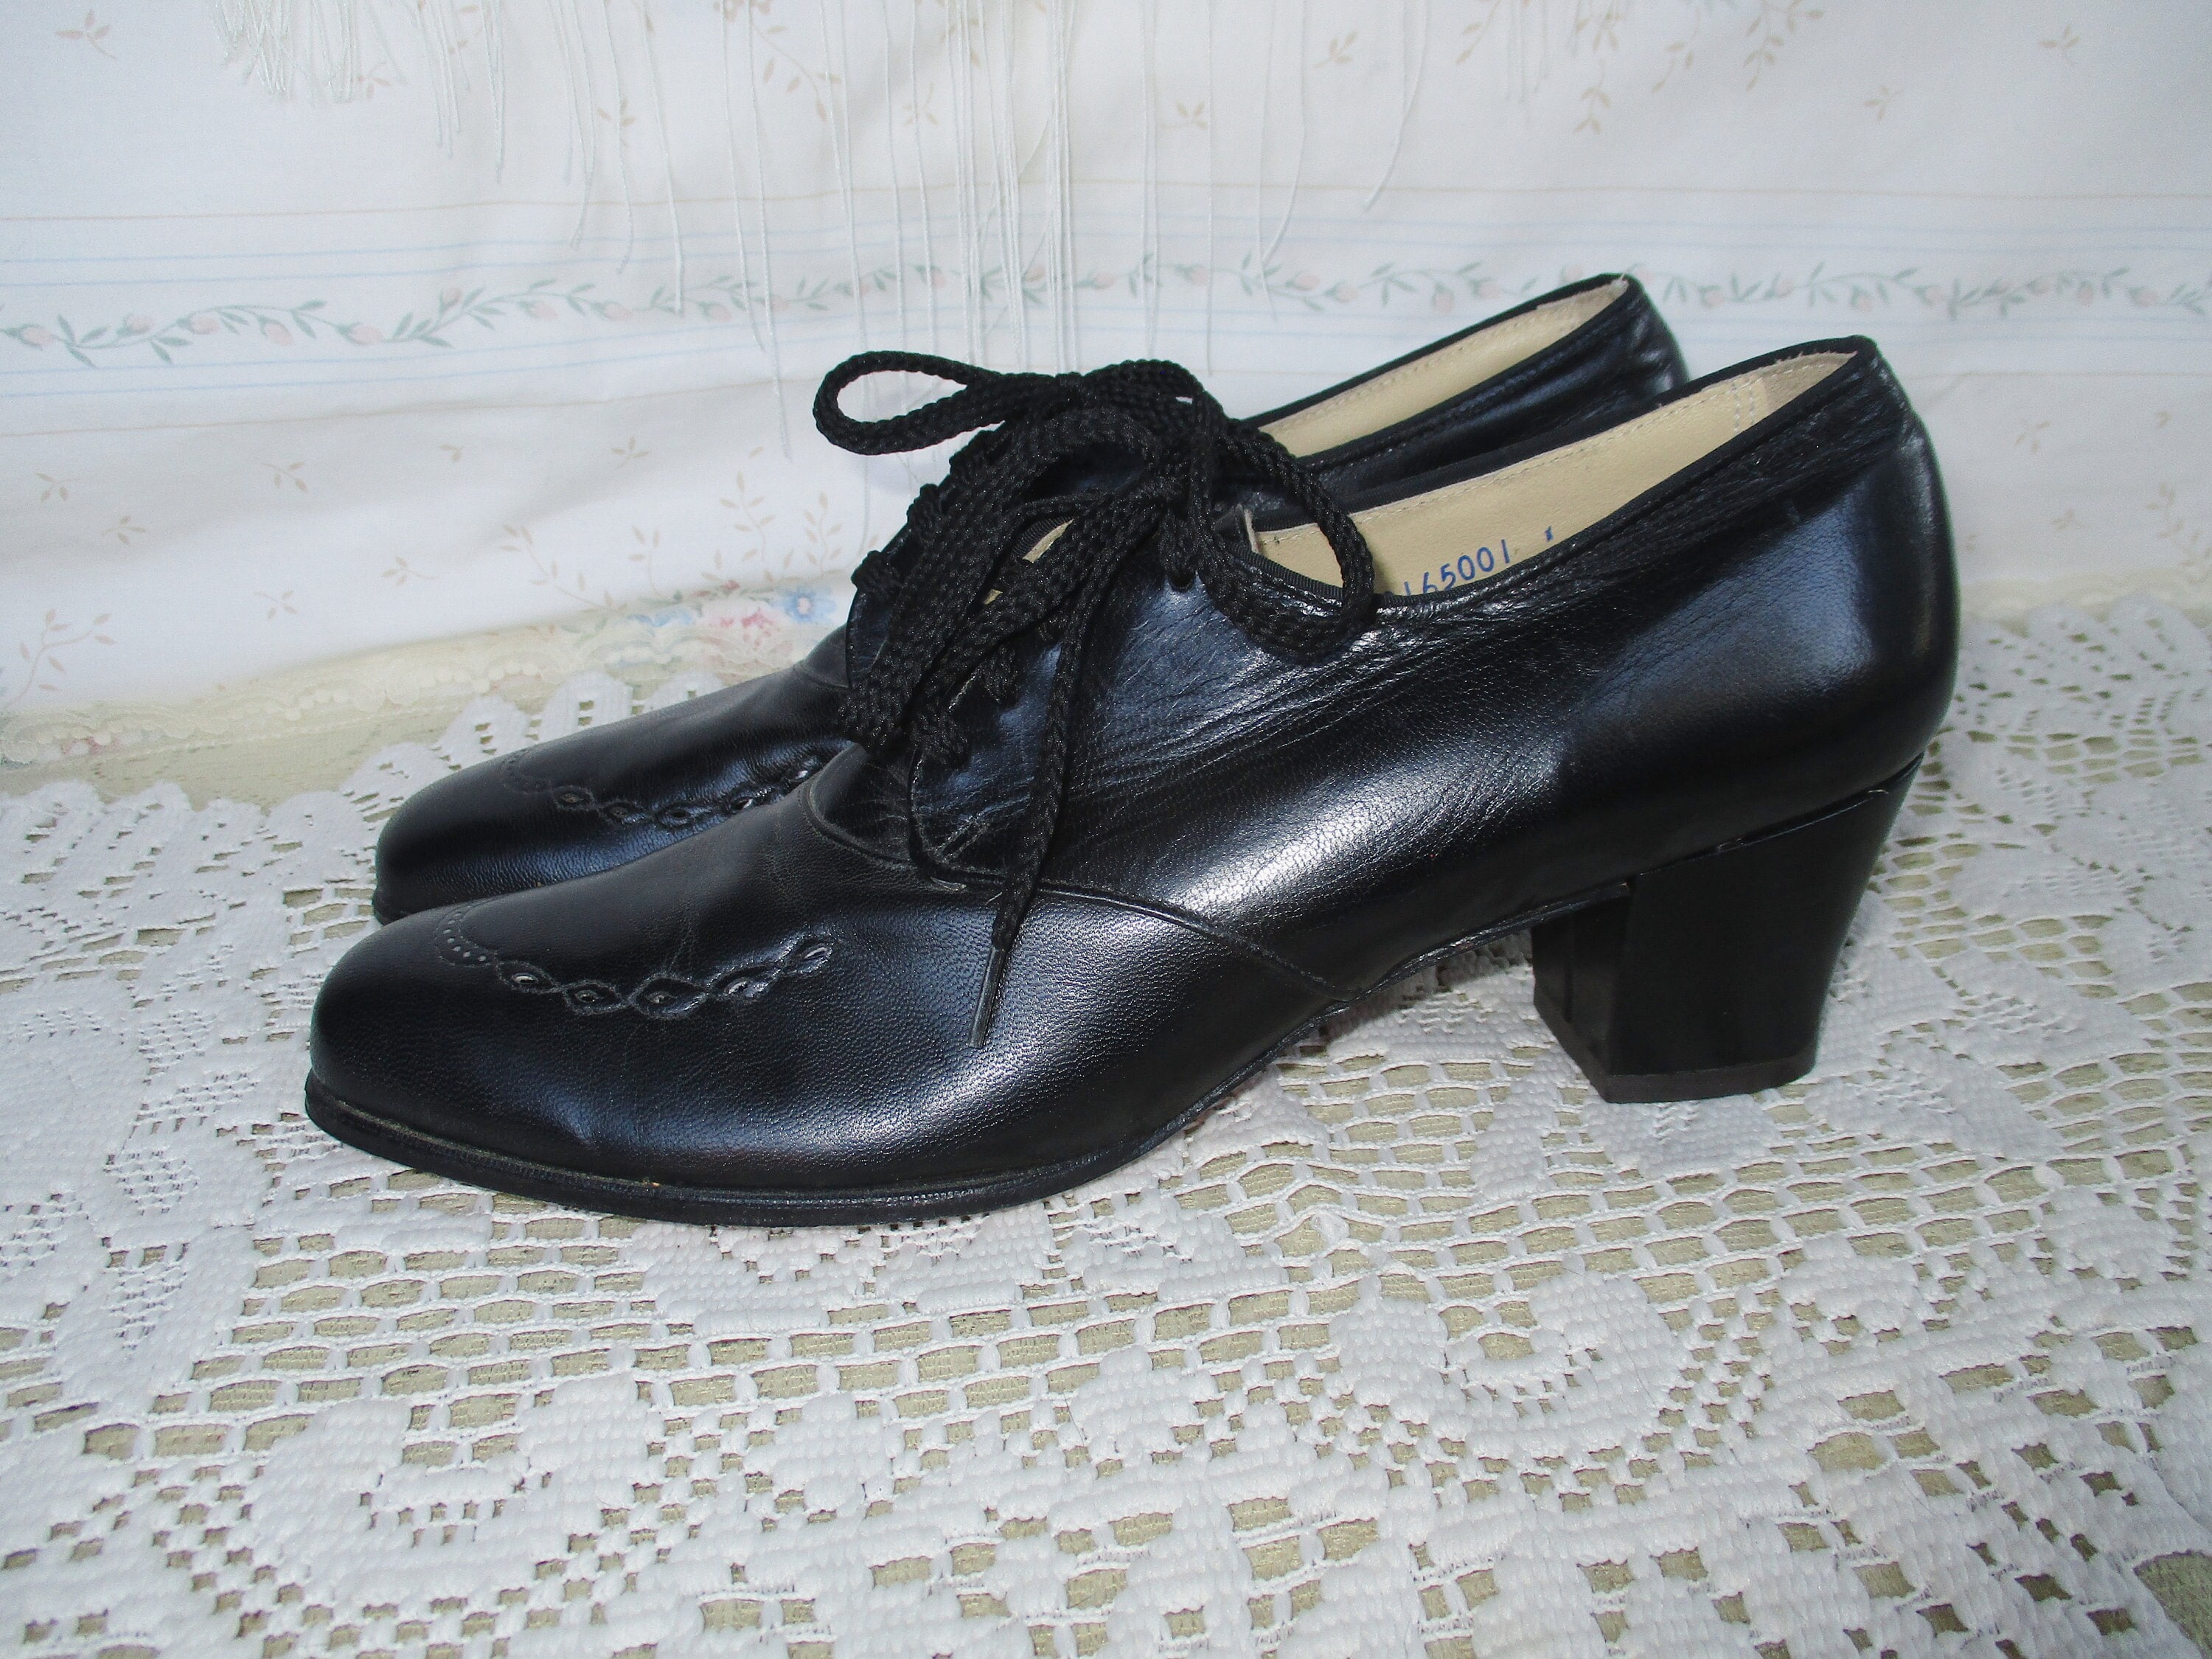 Womens Black Platform Lace Up Ladies Flats Creepers Punk Goth Shoes Size  3-8